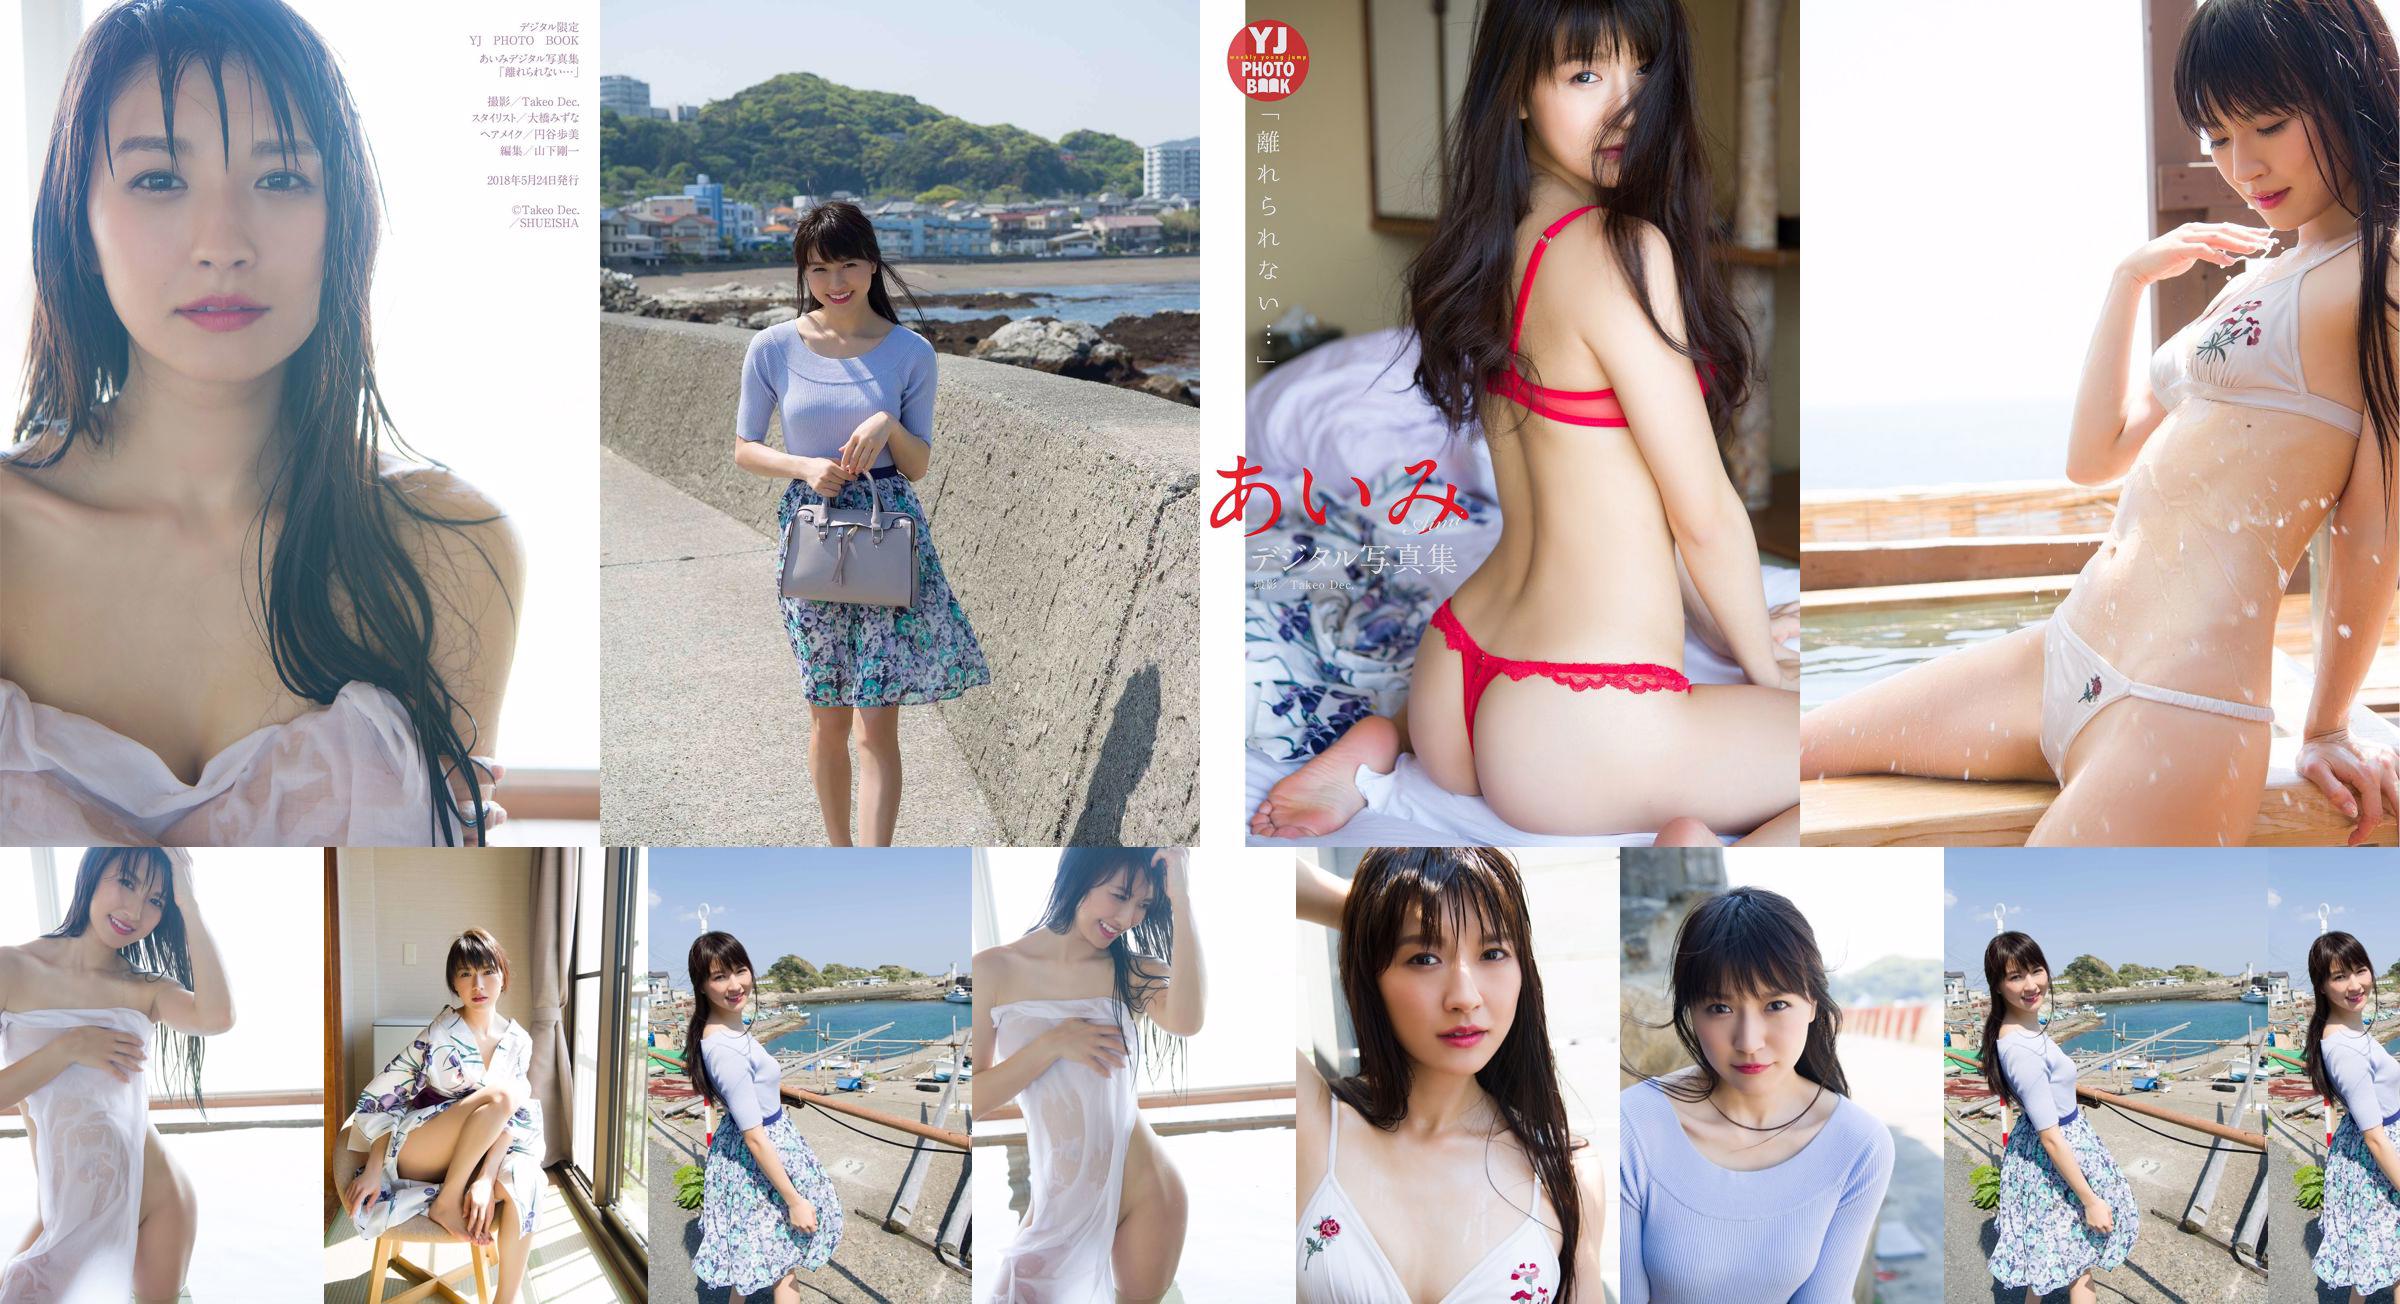 Aimi Nakano "I can't leave ..." [Digital Limited YJ PHOTO BOOK] No.e1f75c Page 3